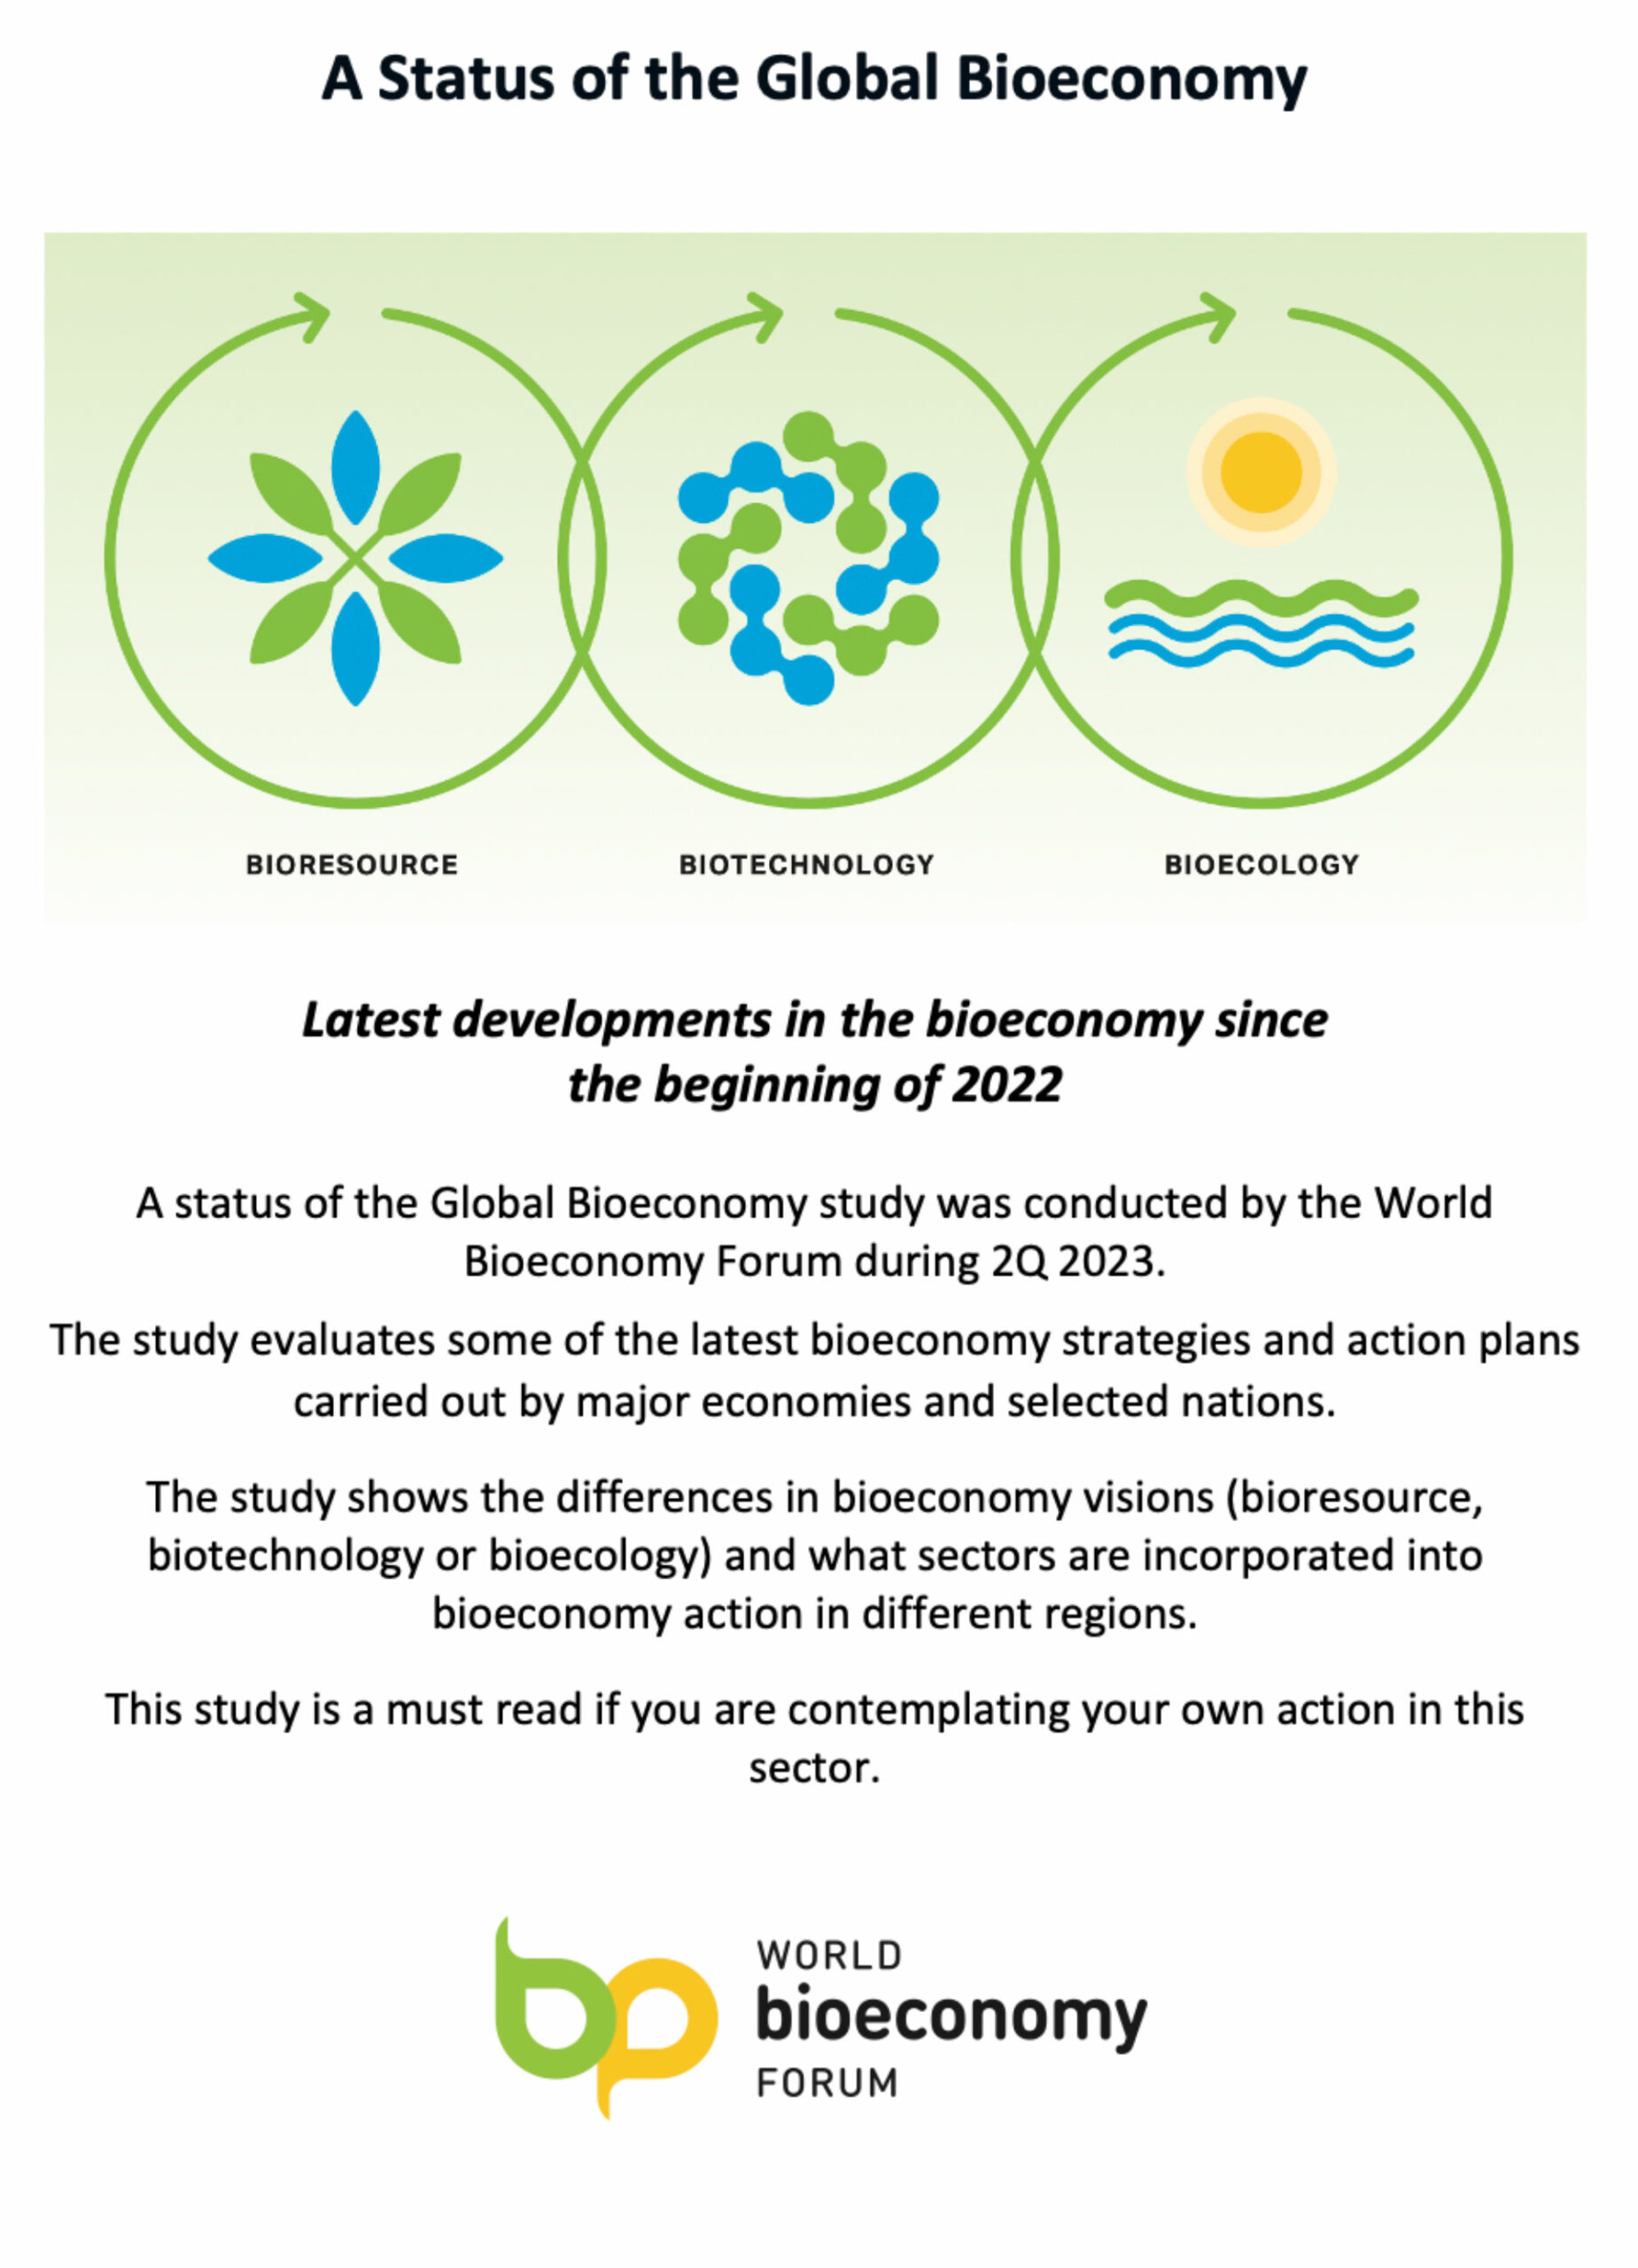 A Status of the Gobal Bioeconomy Report